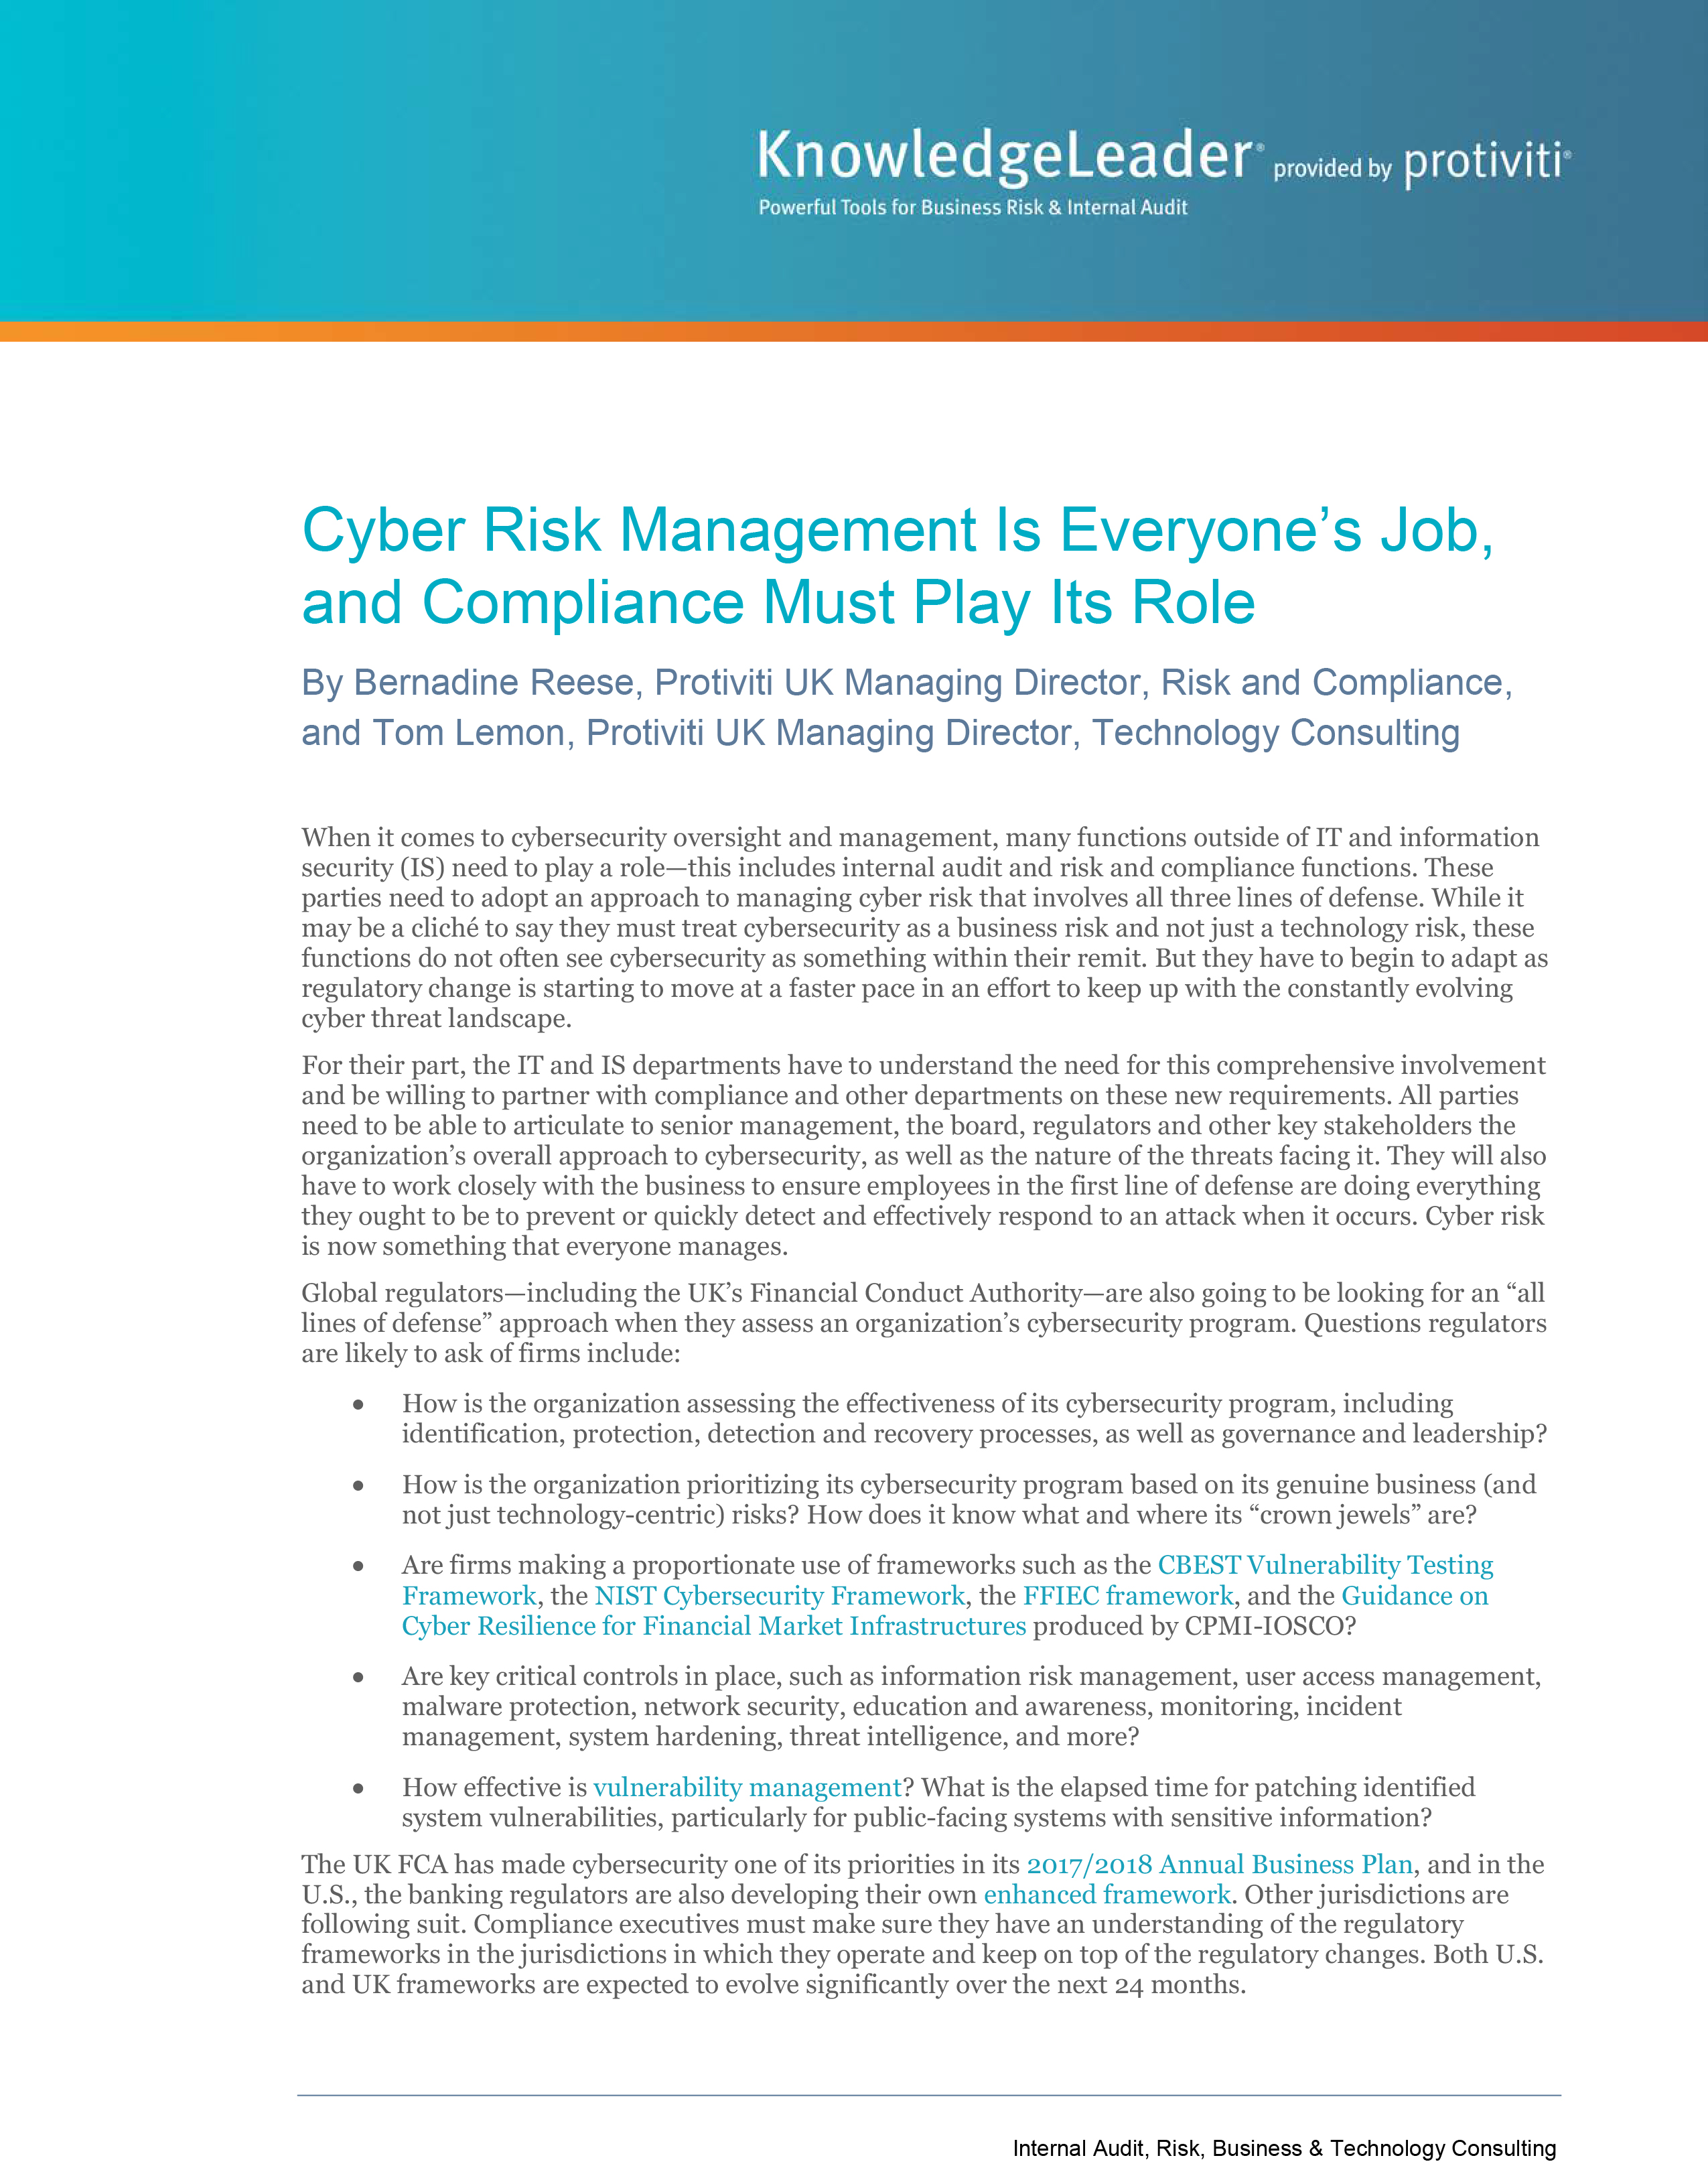 Screenshot of the first page of Cyber Risk Management Is Everyone’s Job, and Compliance Must Play Its Role